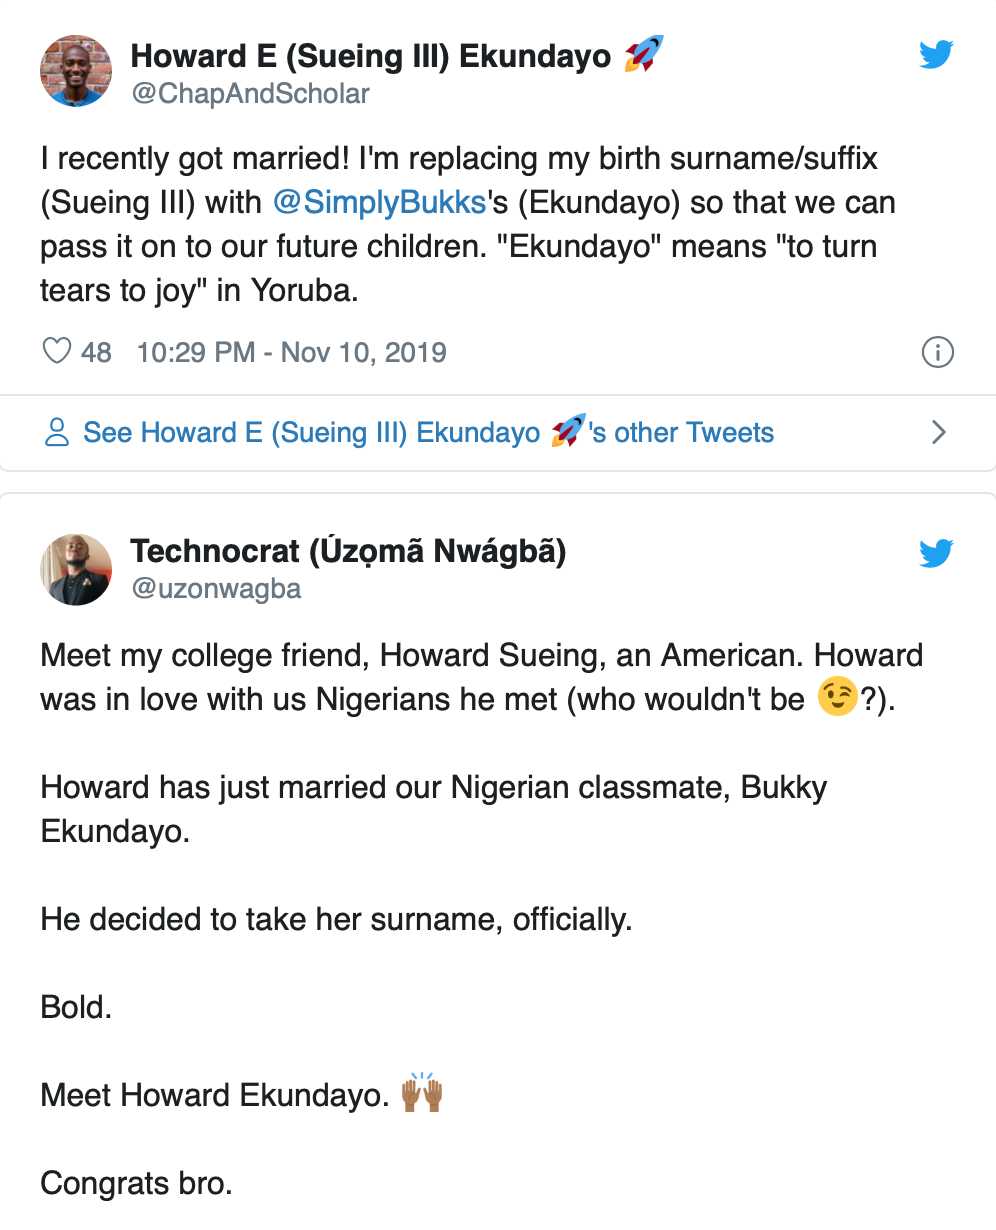 American Man Adopts Nigerian Wife’s Surname An American man has decided to add his wife’s surname to his name after marrying a Nigerian woman.  Howard Sueing III Ekundayo, has adopted his Nigerian wife’s surname, Ekundayo. He made this known on his Twitter page.  Howard, whose Twitter bio reveals he is an Engineering Manager at Netflix, tweeted on Sunday that he had recently got married to a Nigerian woman, one Bukky Ekundayo, and that he was changing his surname to hers, so they could pass it on to their children.  He tweeted, “I recently got married! I’m replacing my birth surname/suffix (Sueing III) with @SimplyBukks‘s (Ekundayo) so that we can pass it on to our future children. “Ekundayo” means “to turn tears to joy” in Yoruba. (sic)”  Howard has already changed his name on Twitter to reflect his new surname. His decision has been well received by the Nigerian Twitter community.  A Twitter user, Uzoma Nwagba sharing a screenshot of Howard’s tweet, wrote  “Meet my college friend, Howard Sueing, an American. Howard was in love with us Nigerians he met (who wouldn’t be?). Howard has just married our Nigerian classmate, Bukky Ekundayo. He decided to take her surname, officially. Bold. Meet Howard Ekundayo. Congrats bro.”  Another user,  ‘Sire @SiredOne said, He looks Nigerian already  while Mike J @CodeInBlack wrote “That’s that 🇳🇬 love spirit. Congrats.”